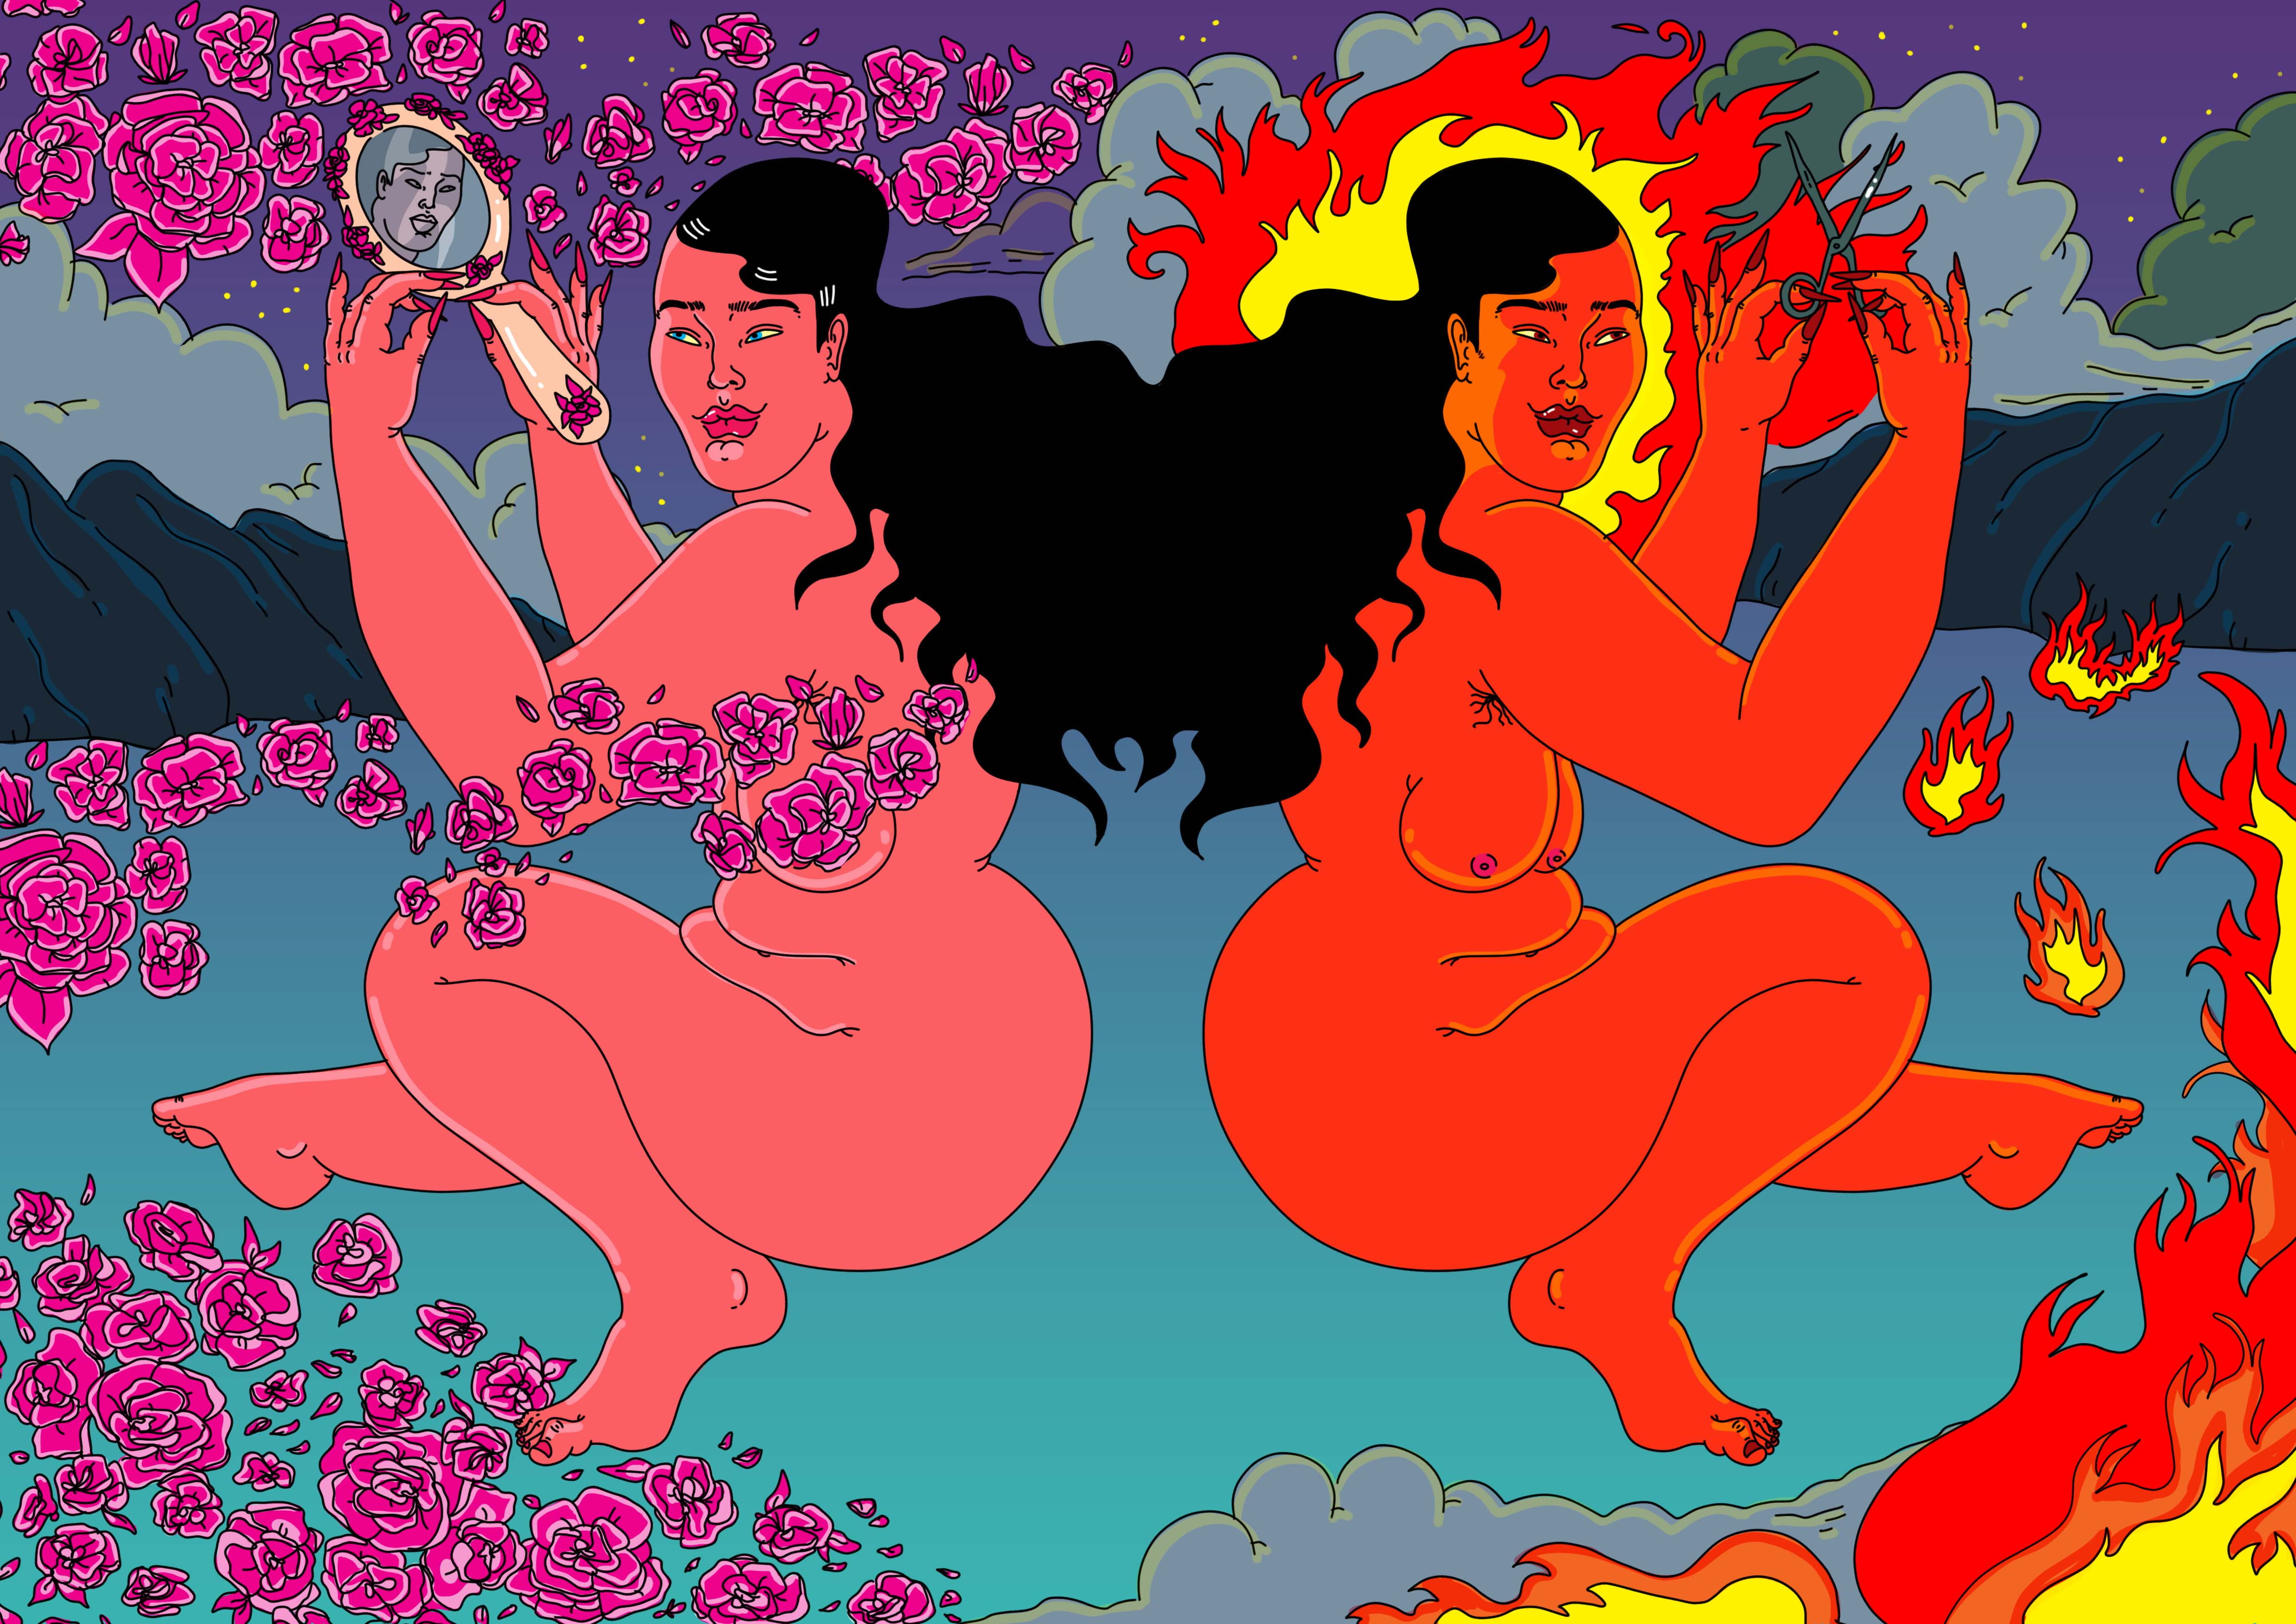 Two females crouch back-to-back naked, in the centre of the image. One holds scissors and is engulfed in flames, the other holds a mirror and is engulfed in flowers.